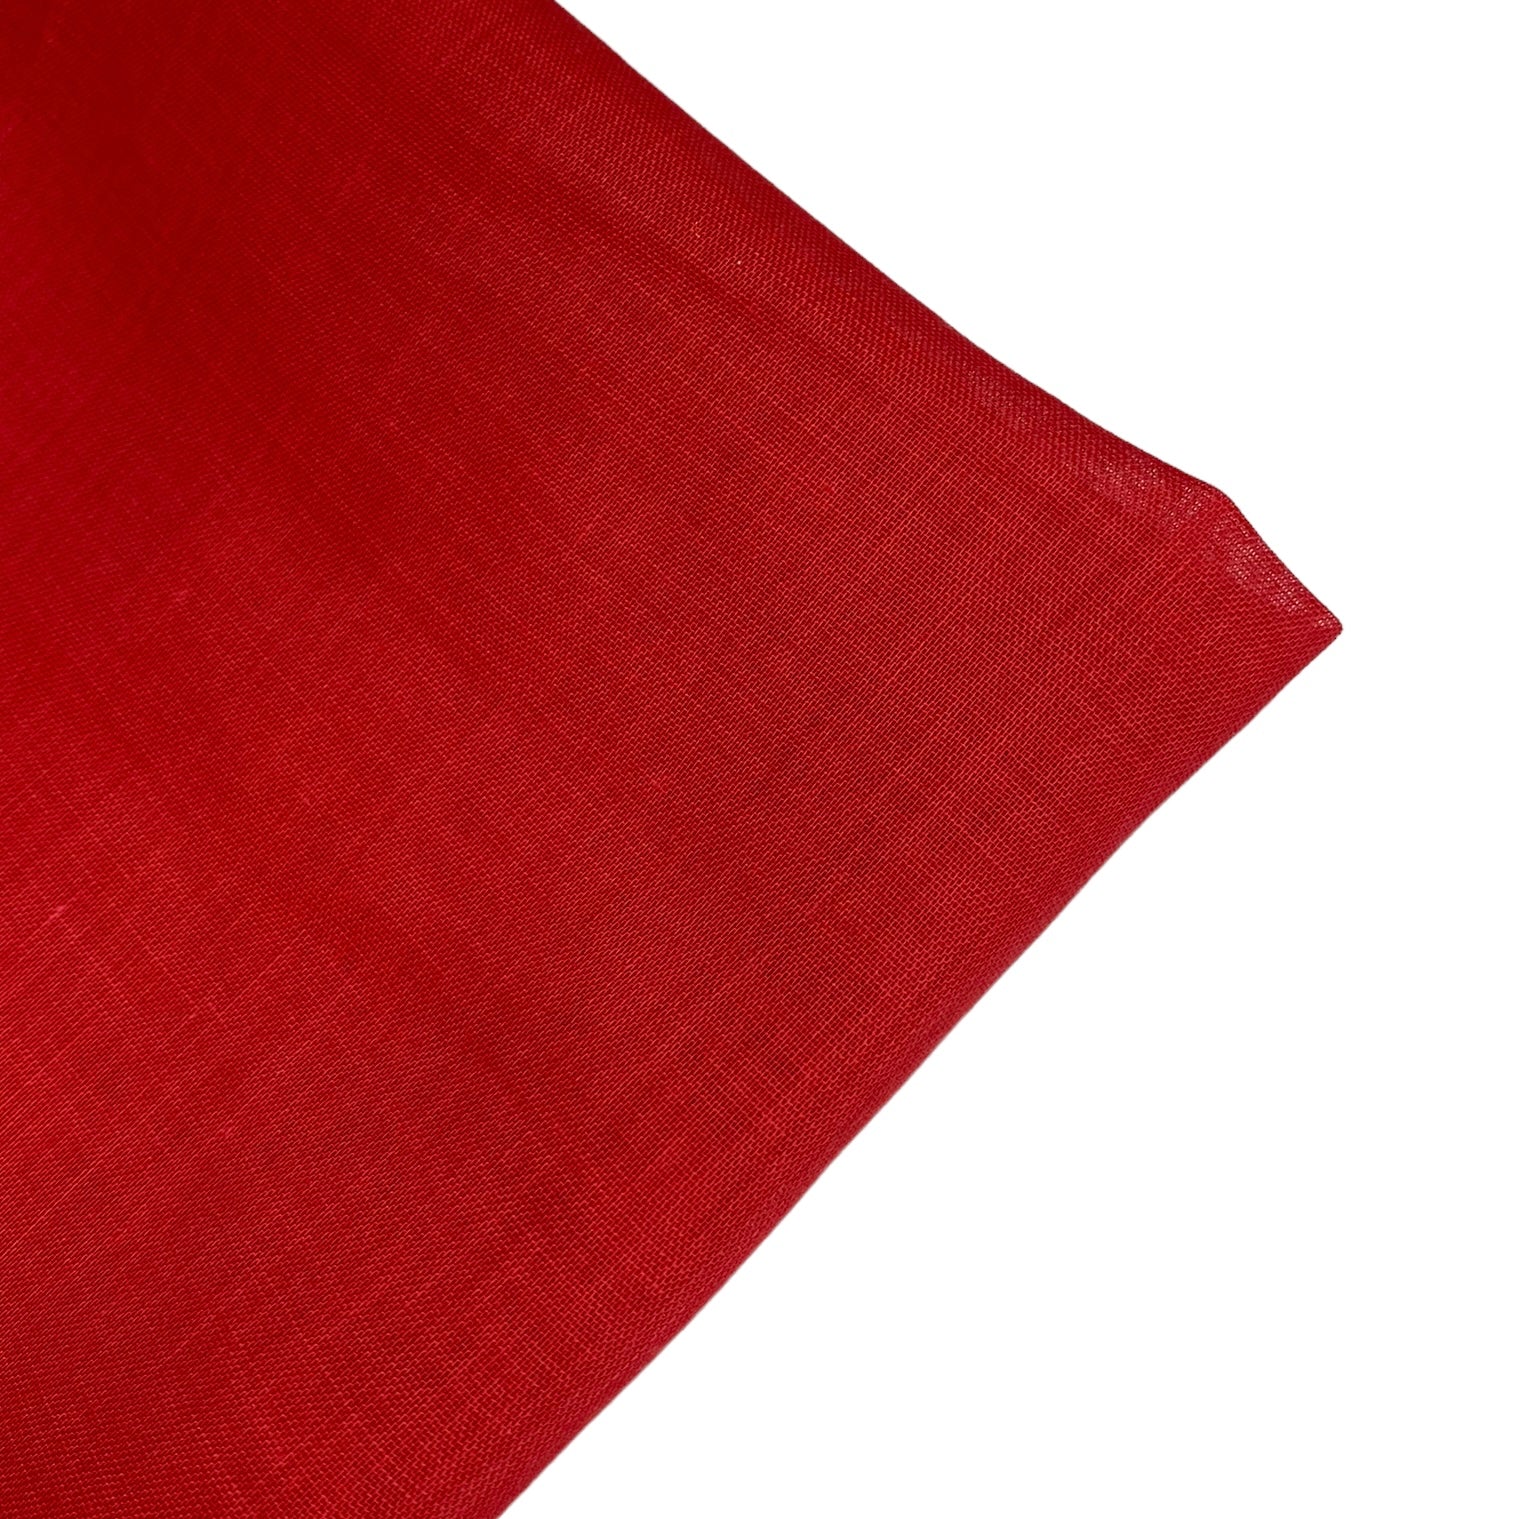 Cotton/Polyester Voile - Red